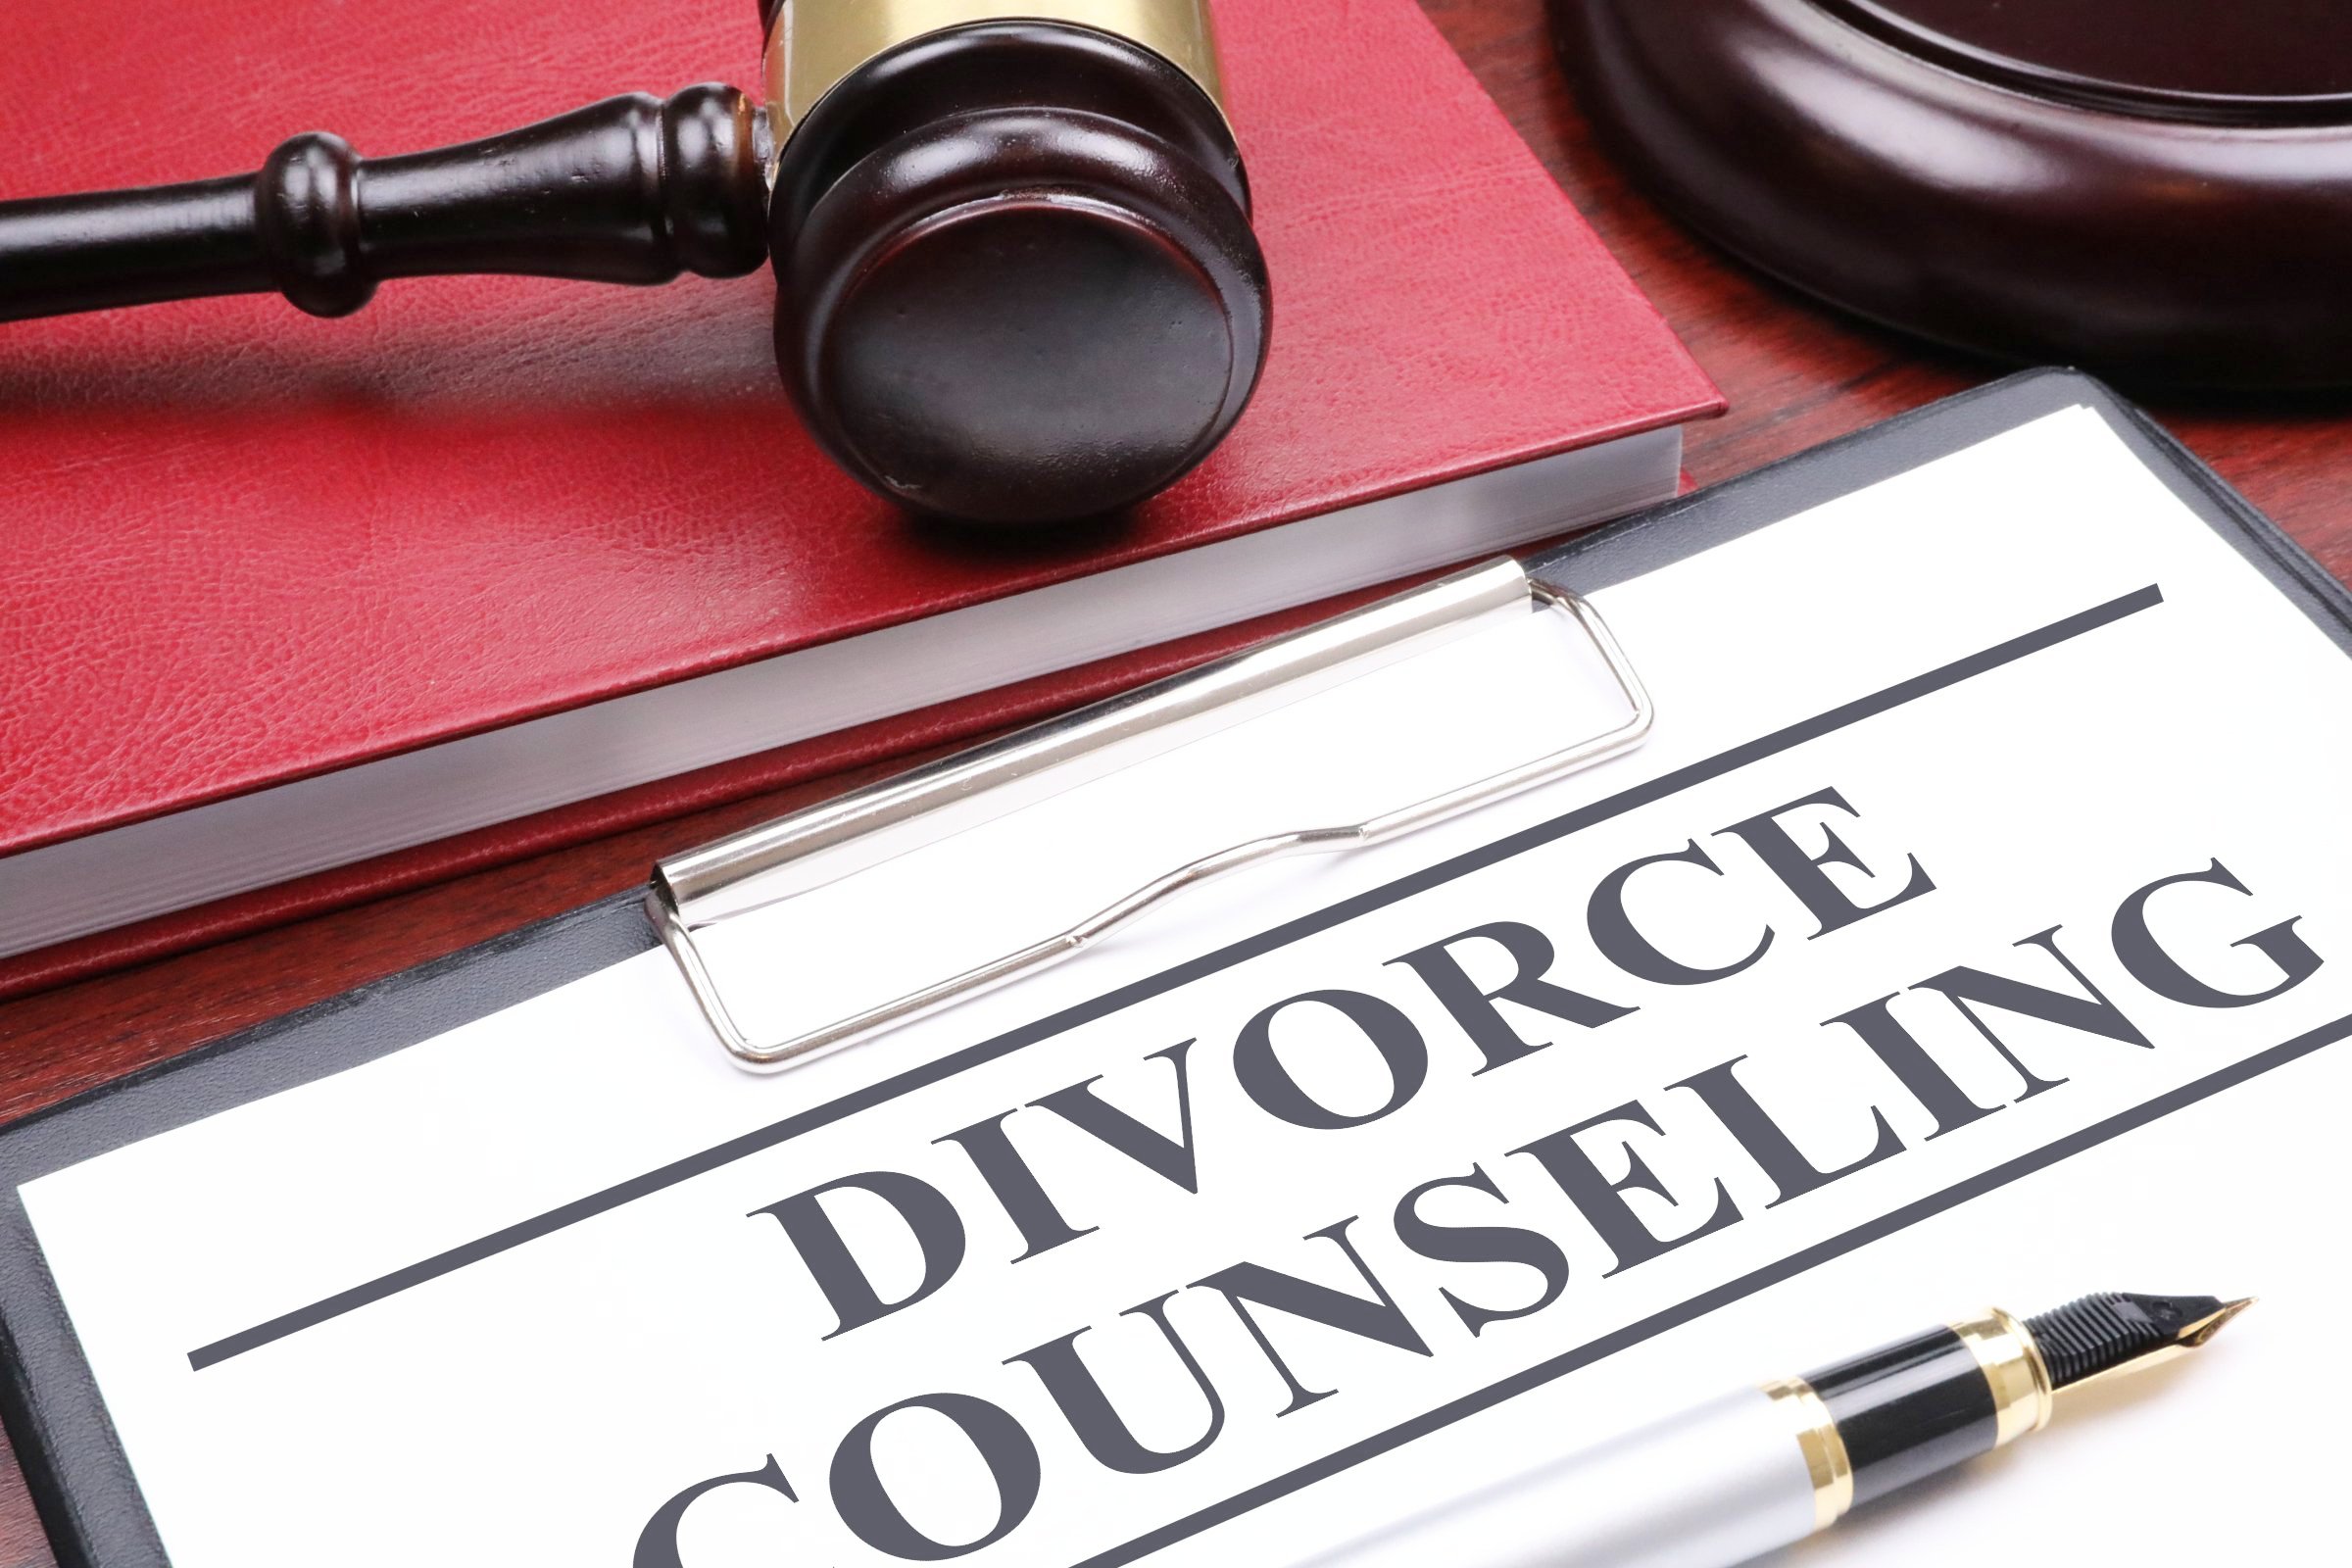 Free of Charge Creative Commons divorce counseling Image - Legal 6